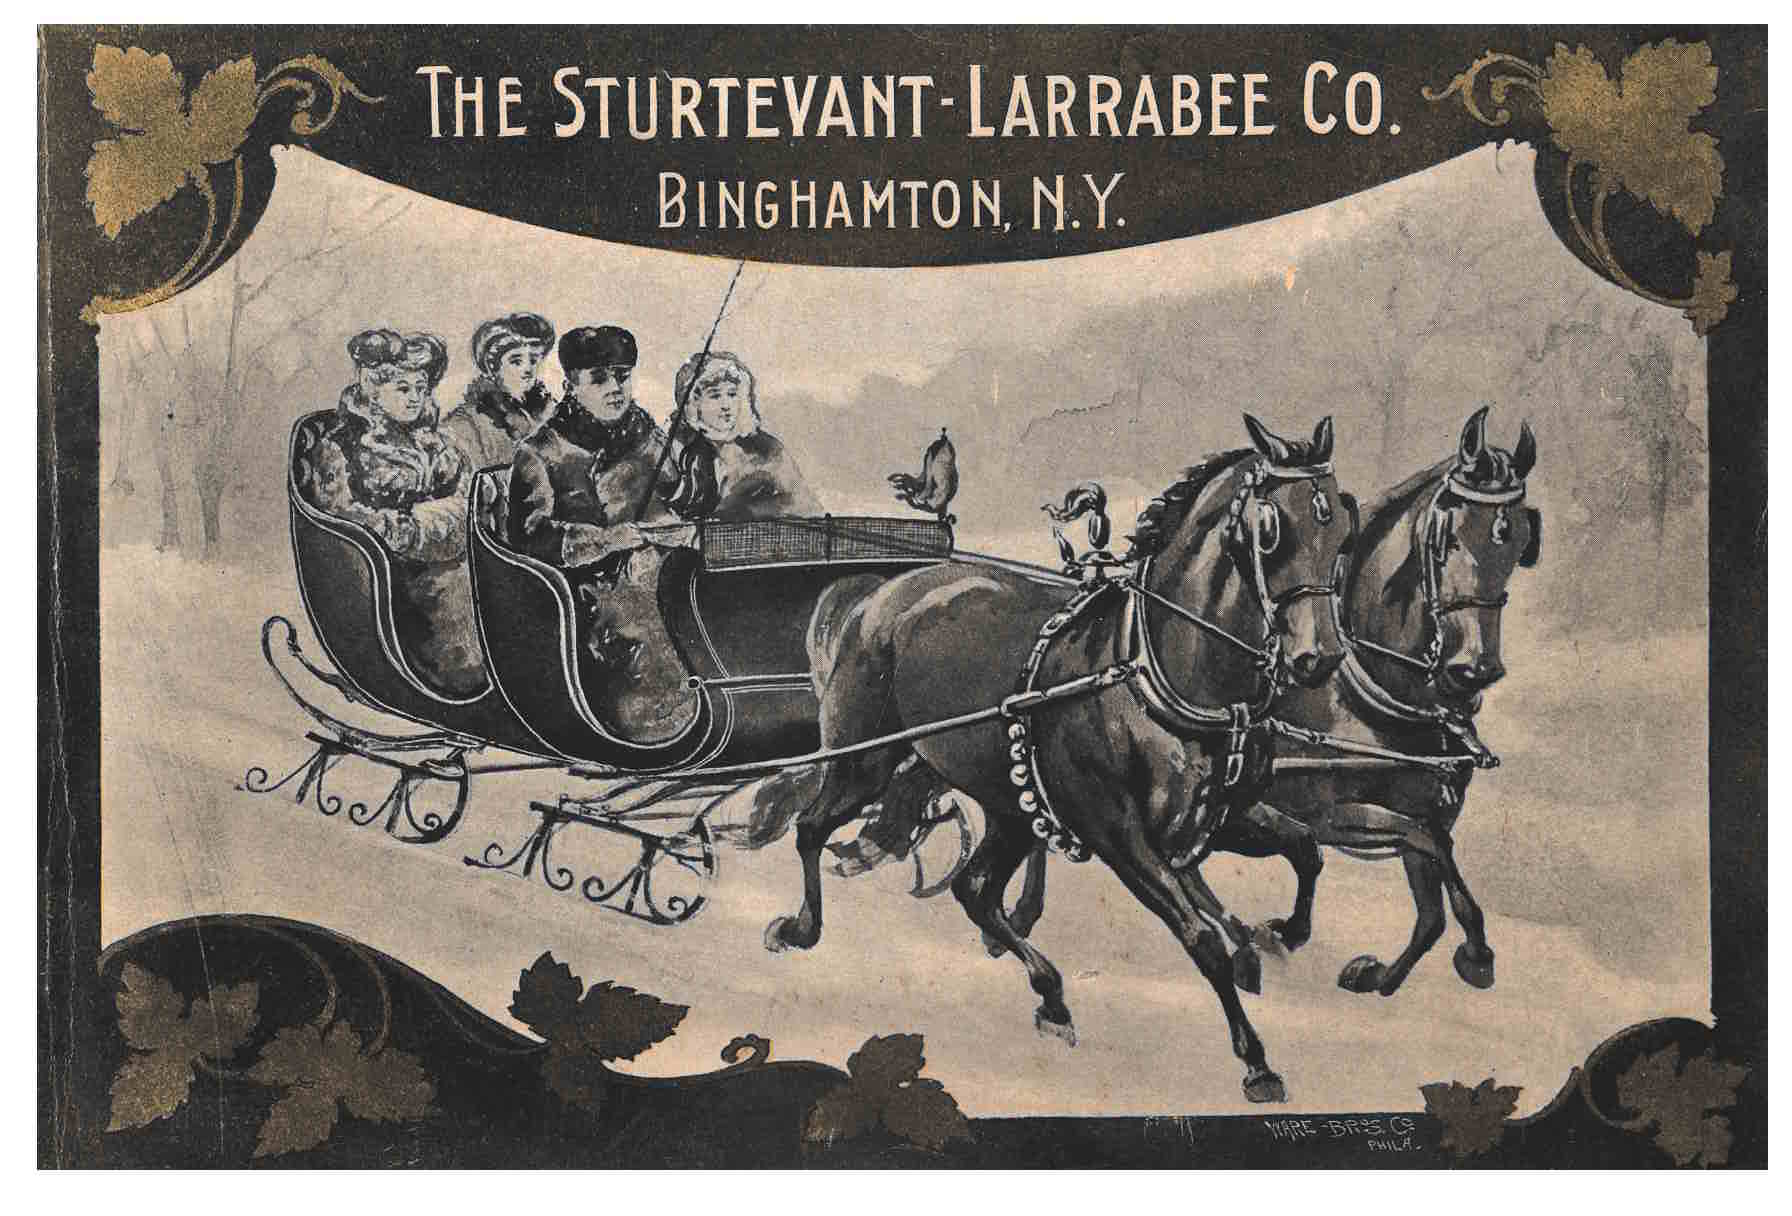 four people riding a sleigh in two rows of seats with two horses pulling it through a snowy landscape